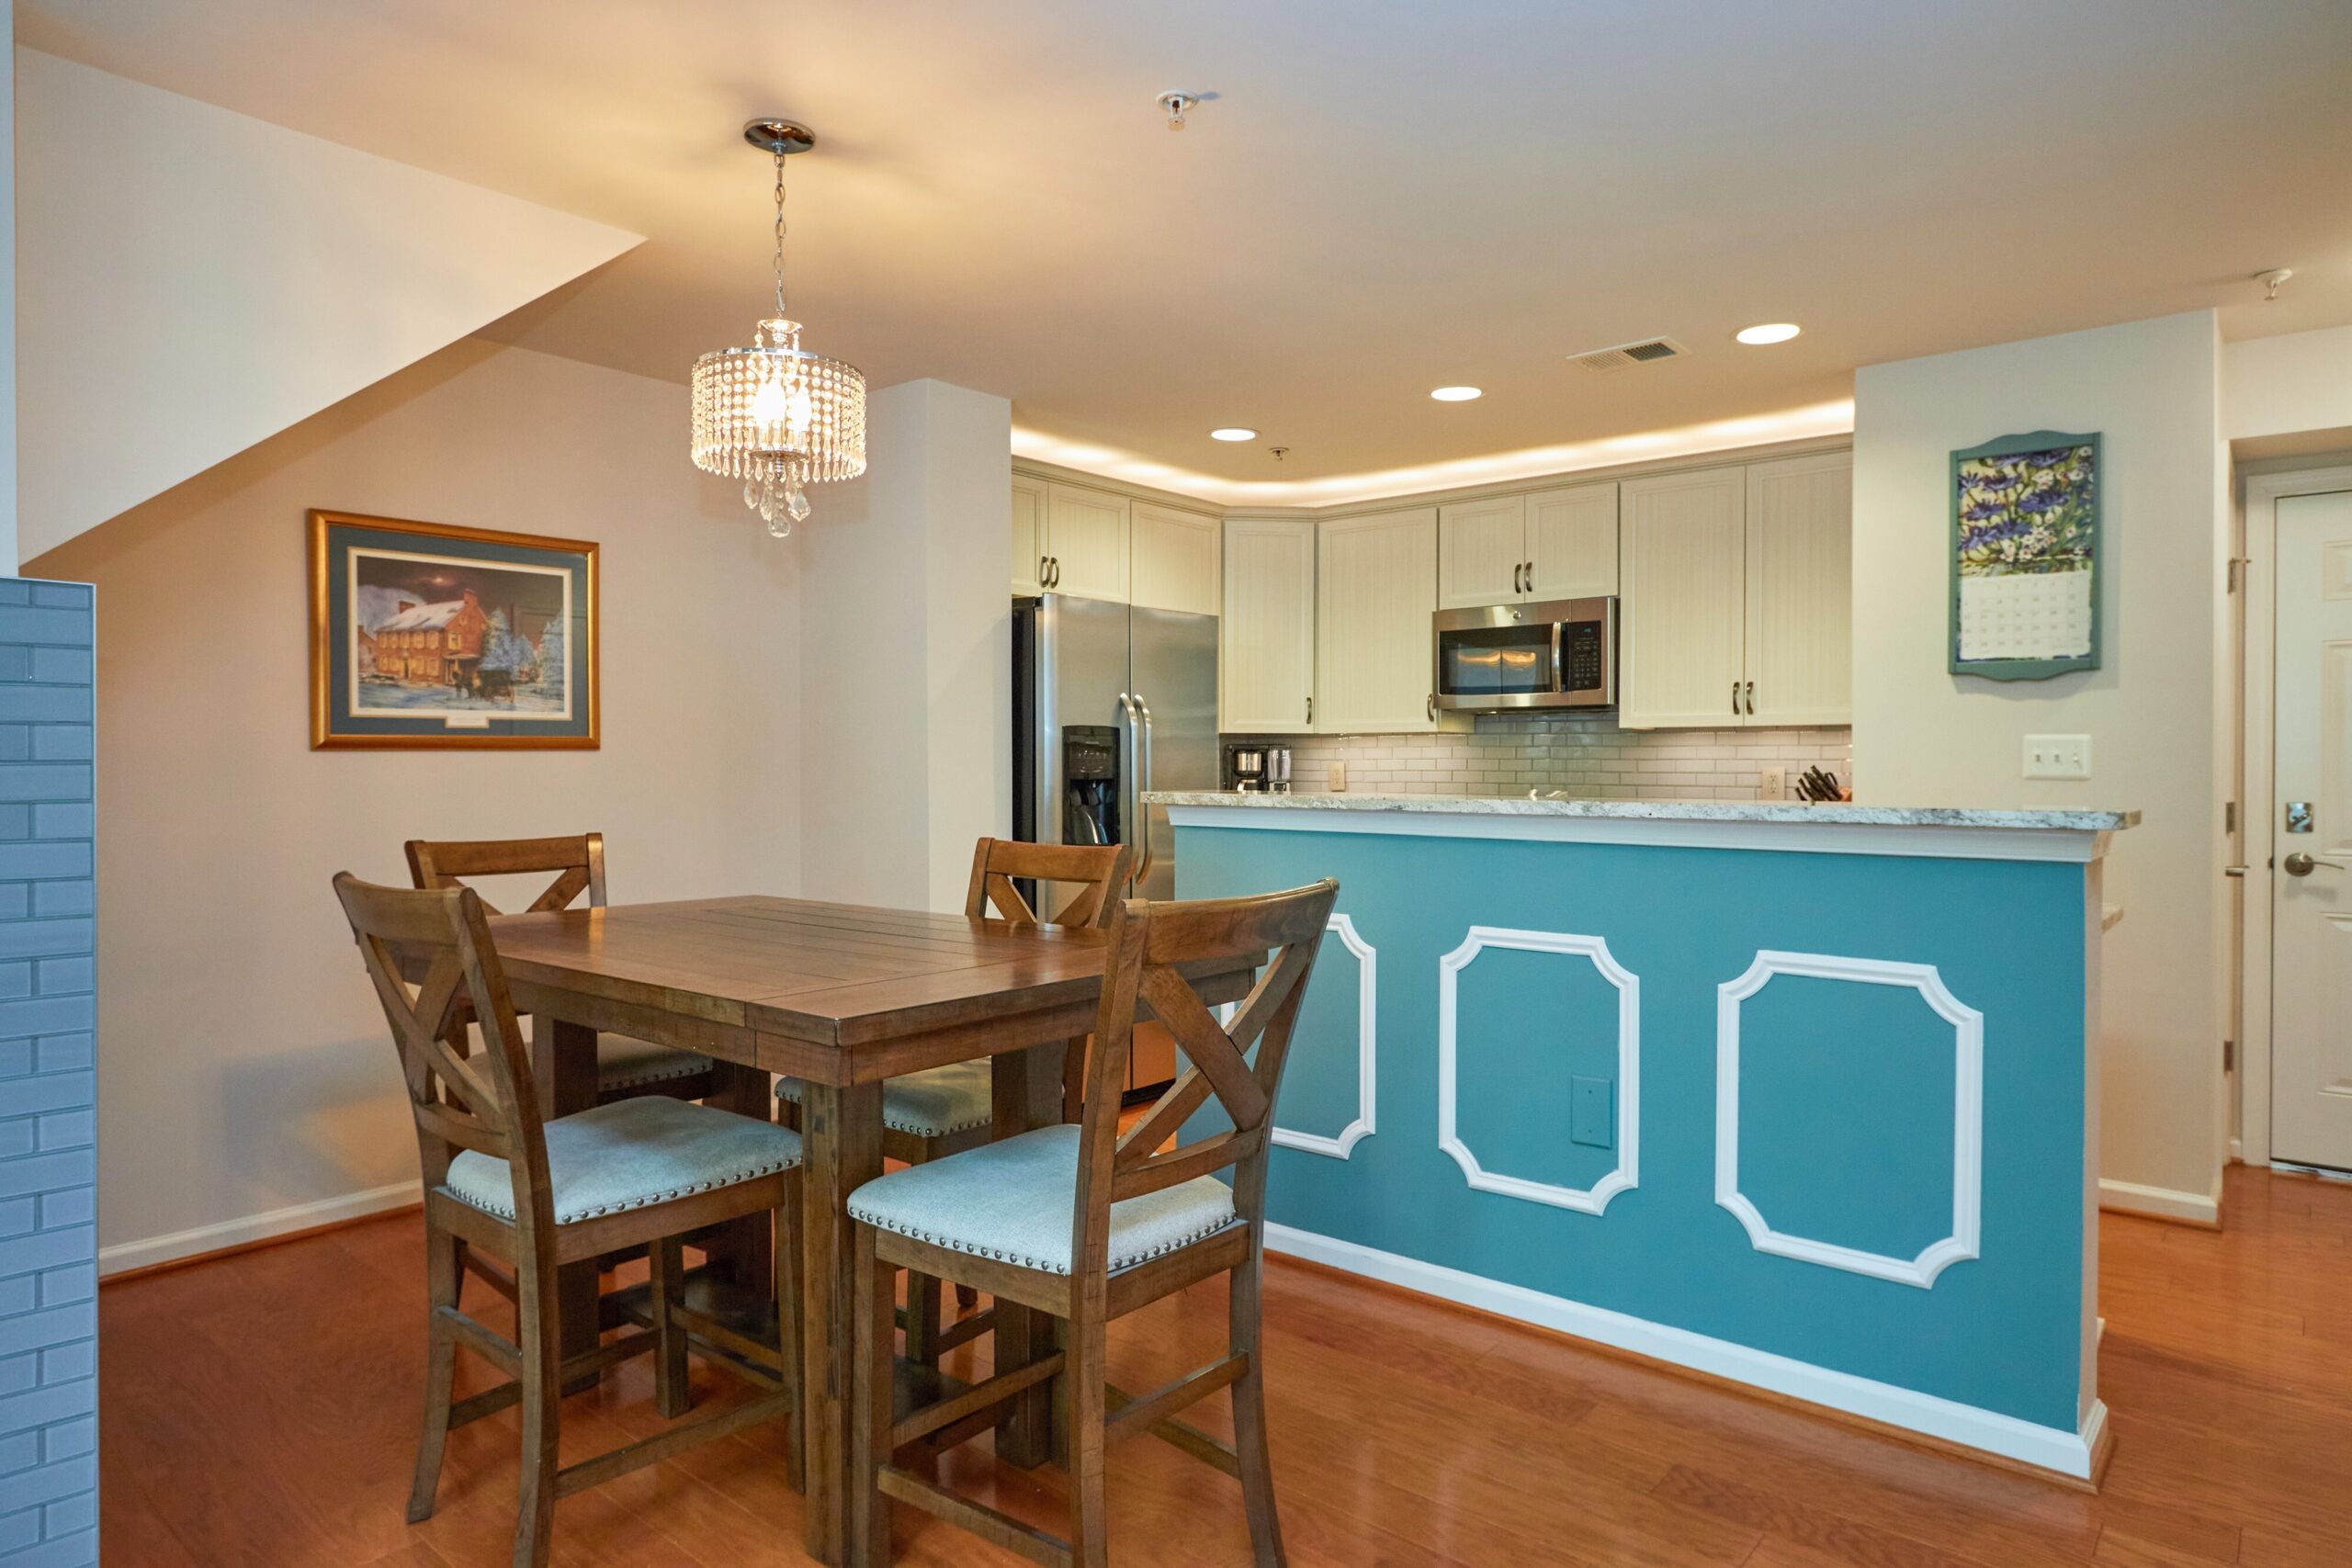 Professional interior photo of 6058 Aster Haven Circle - showing the dining room in the foreground and kitchen with large island in the background